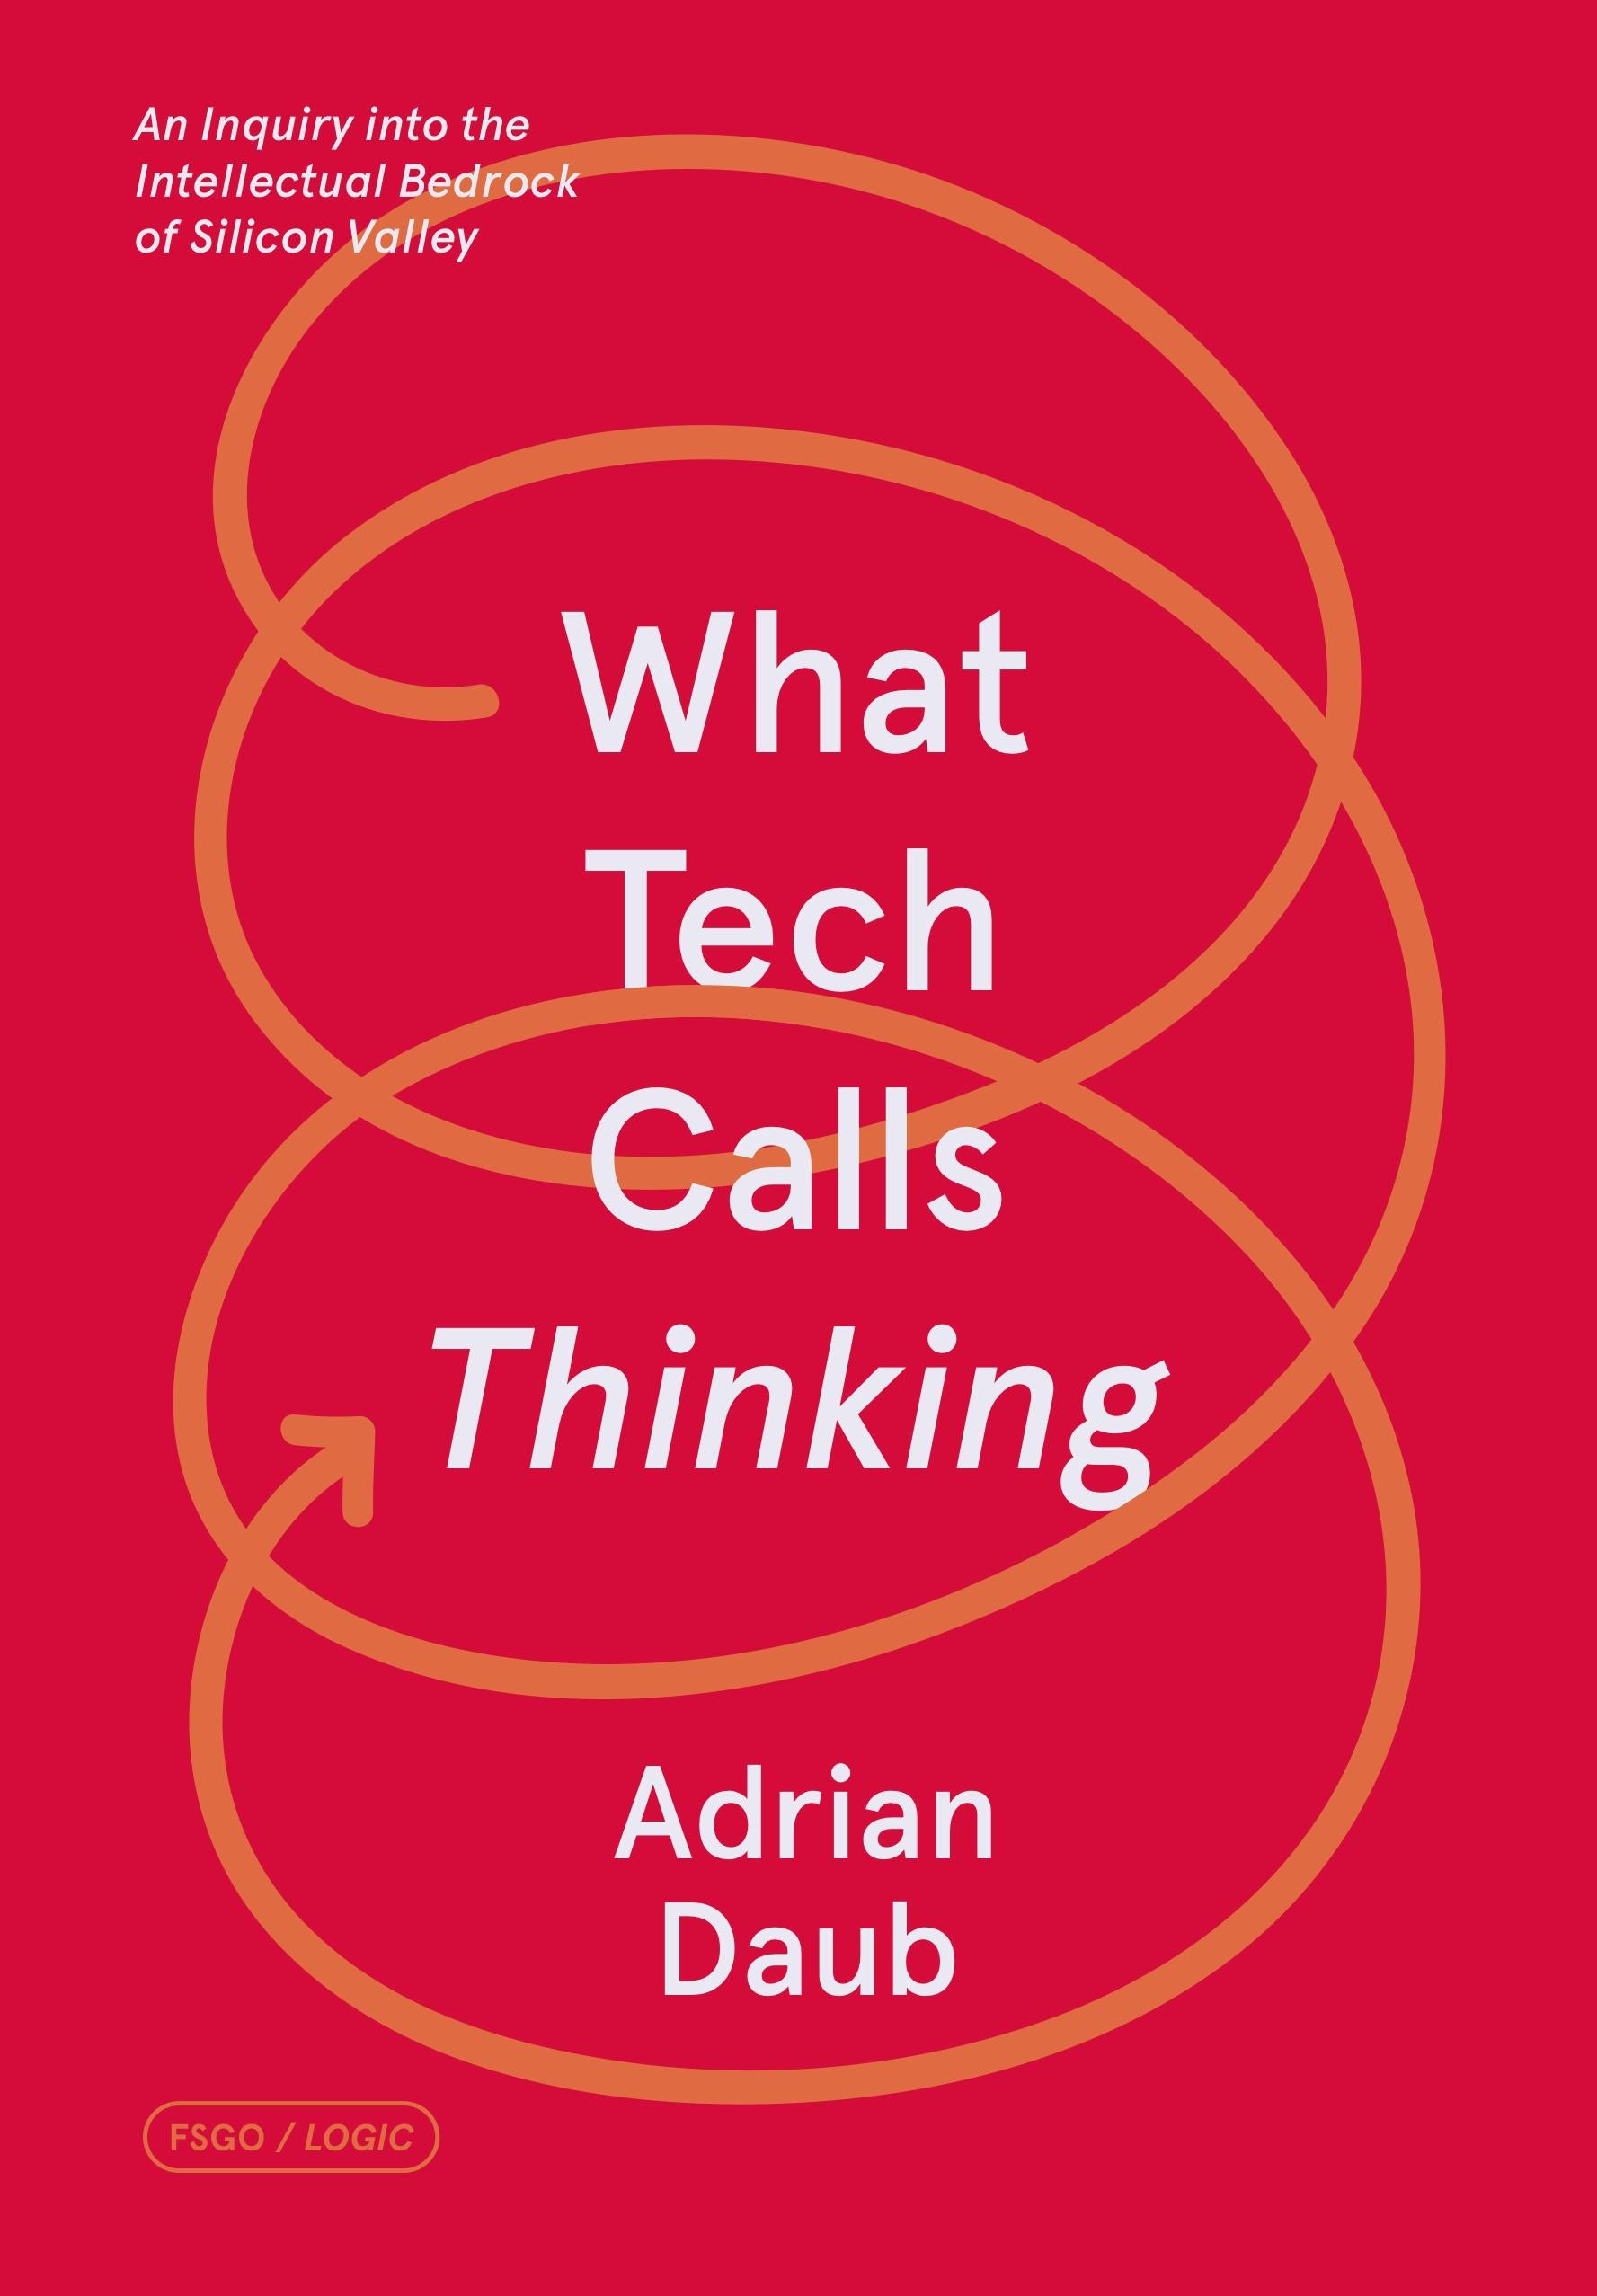 The media cover for “What Tech Calls Thinking” by Adrian Daub